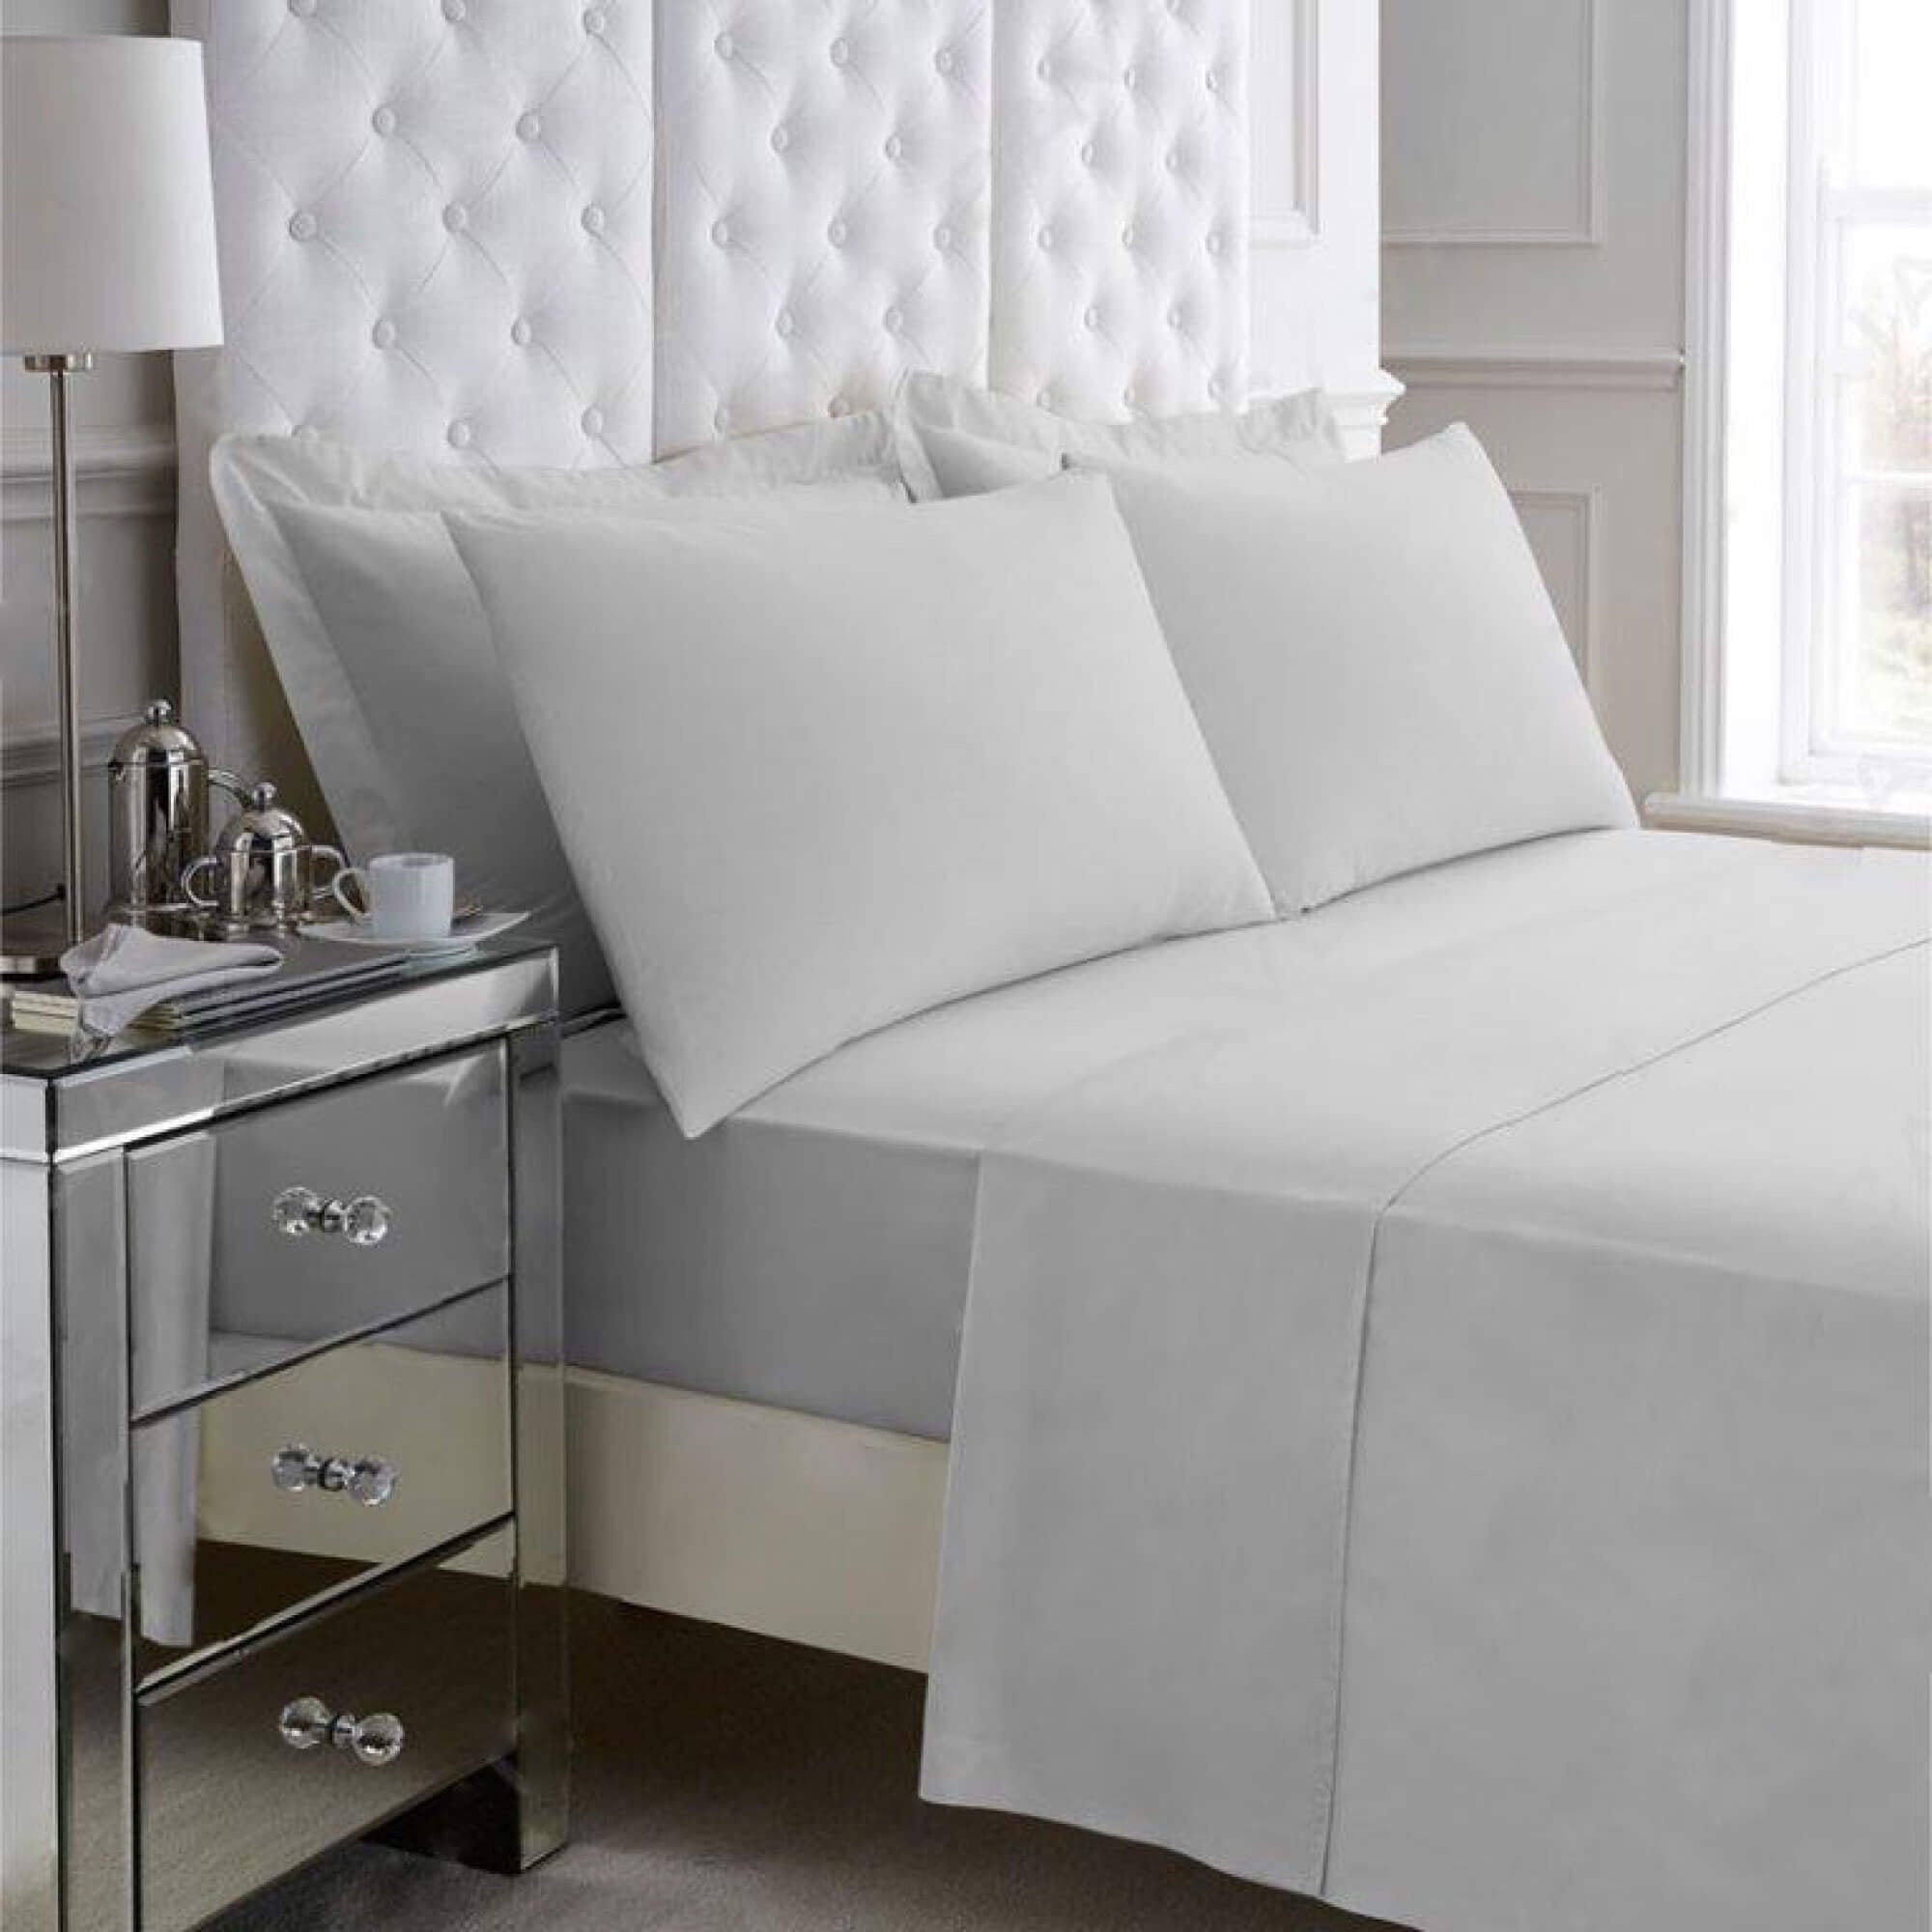 Non Iron Percale Bedding Sheet Range - Silver - King Fitted - TJ Hughes